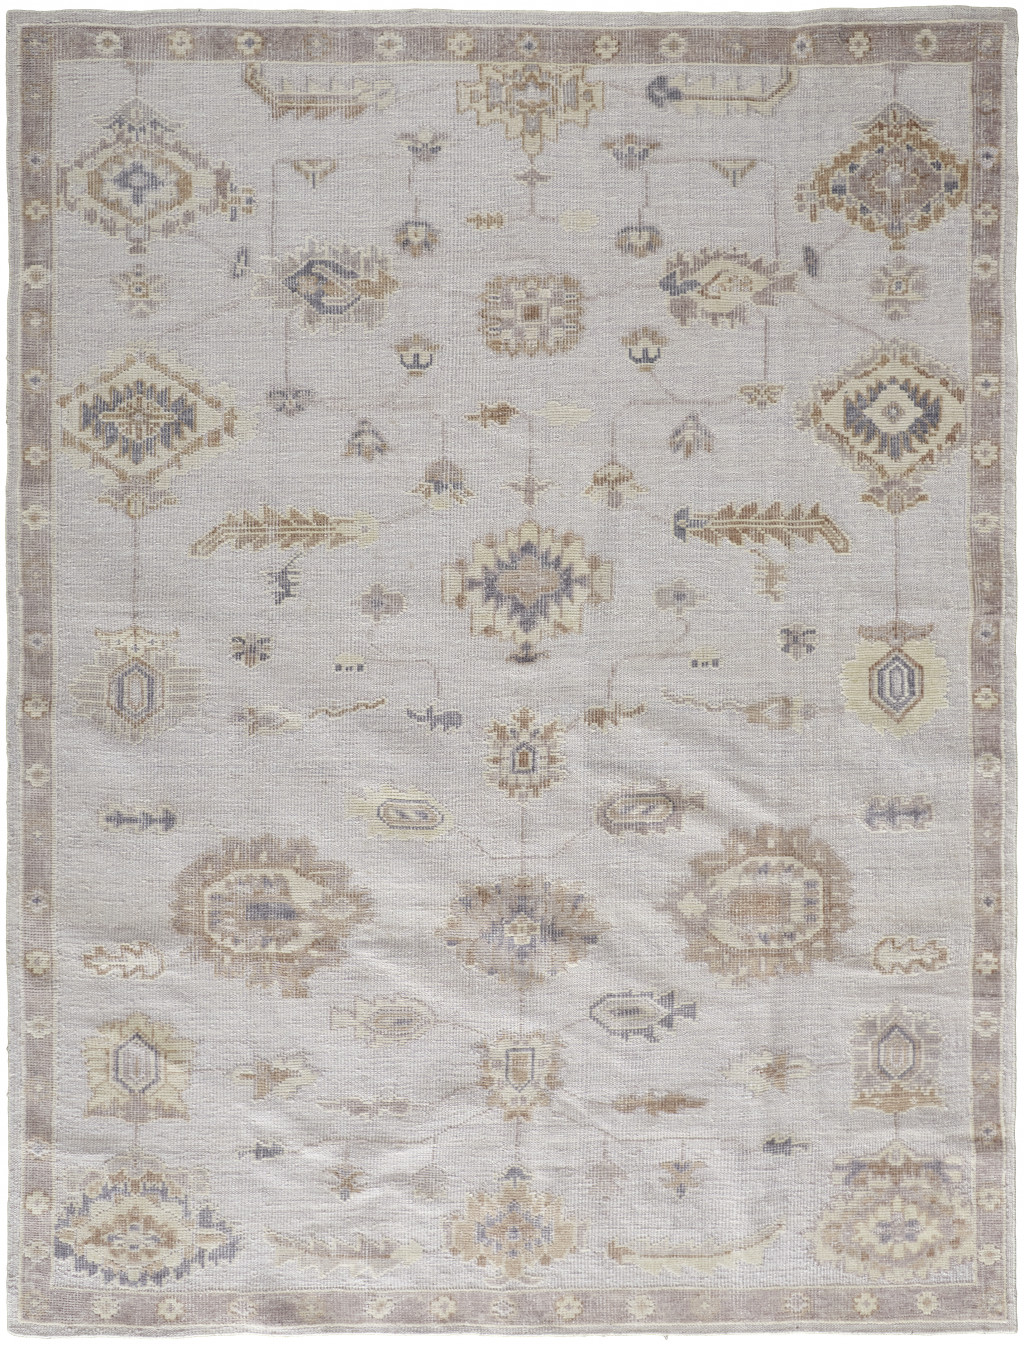 5' X 8' Ivory And Orange Floral Hand Knotted Stain Resistant Area Rug-514971-1